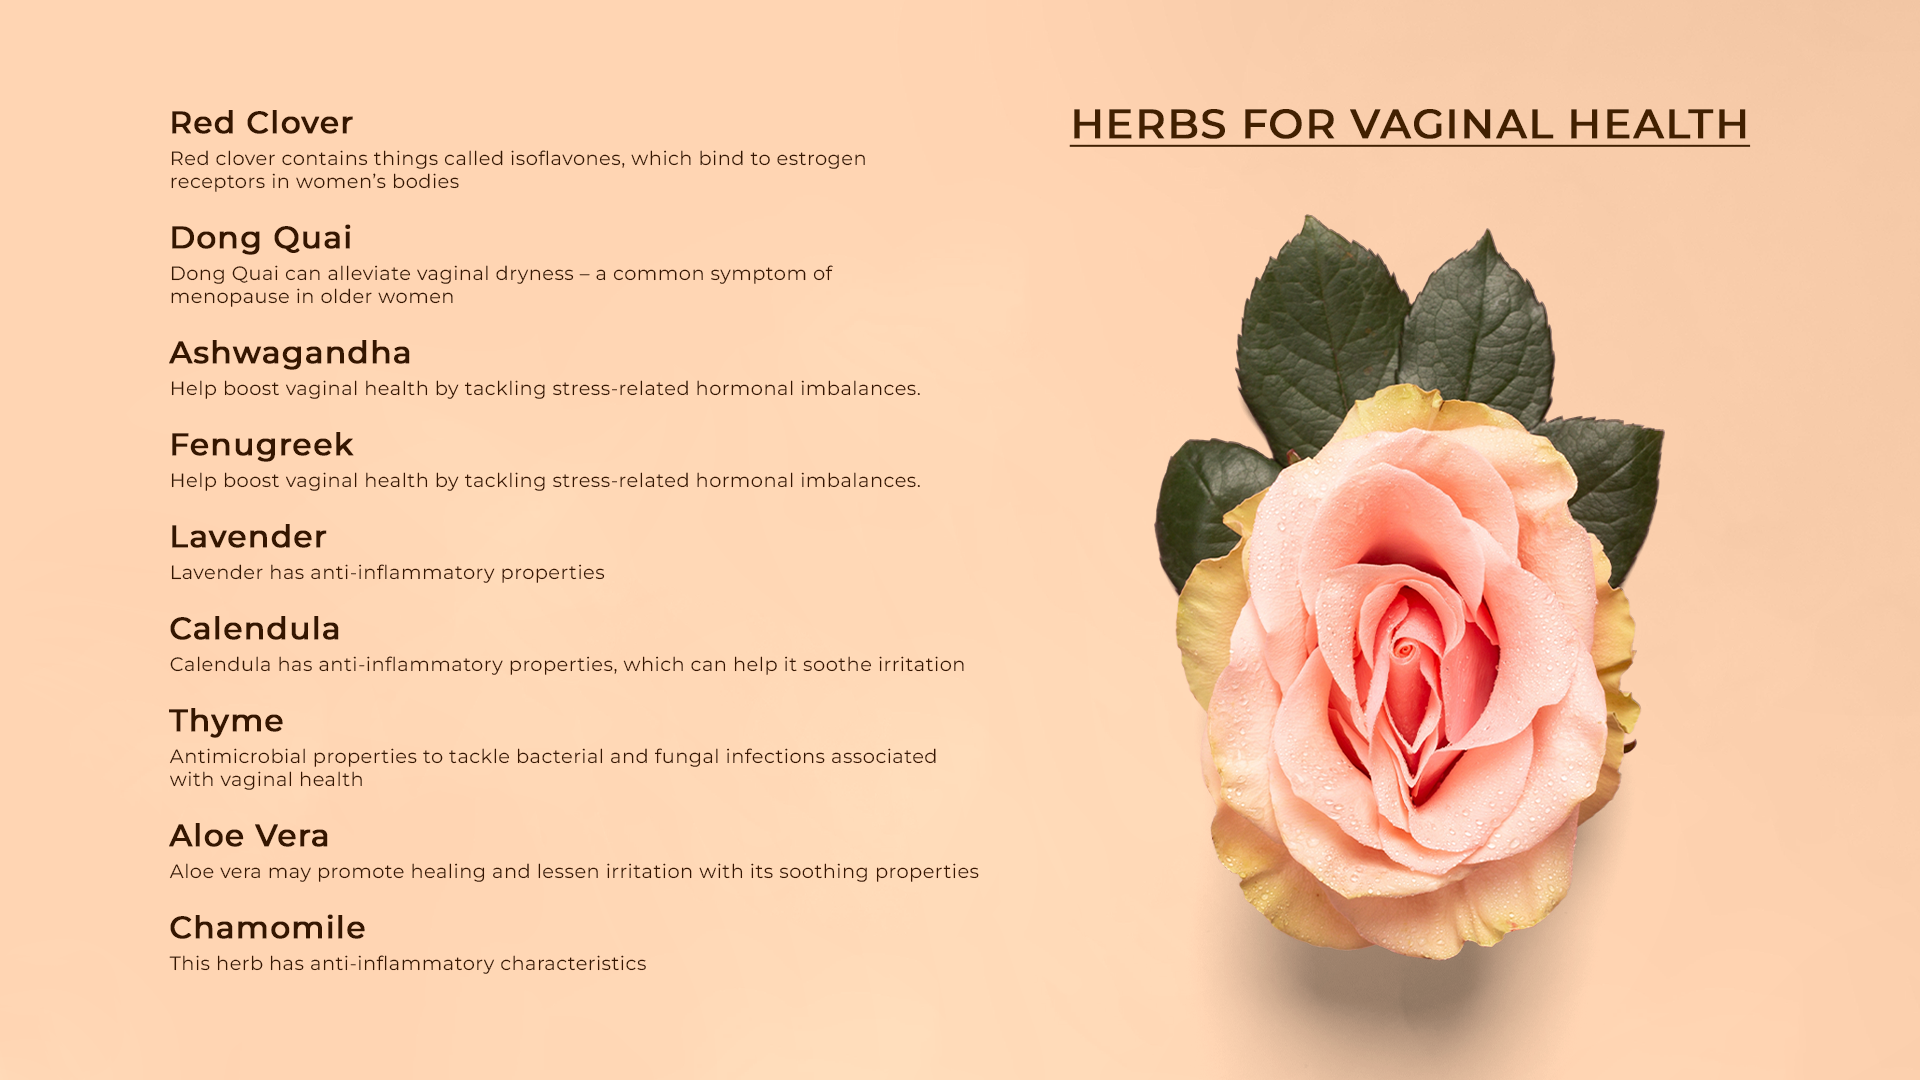 Herbs for Vaginal Health